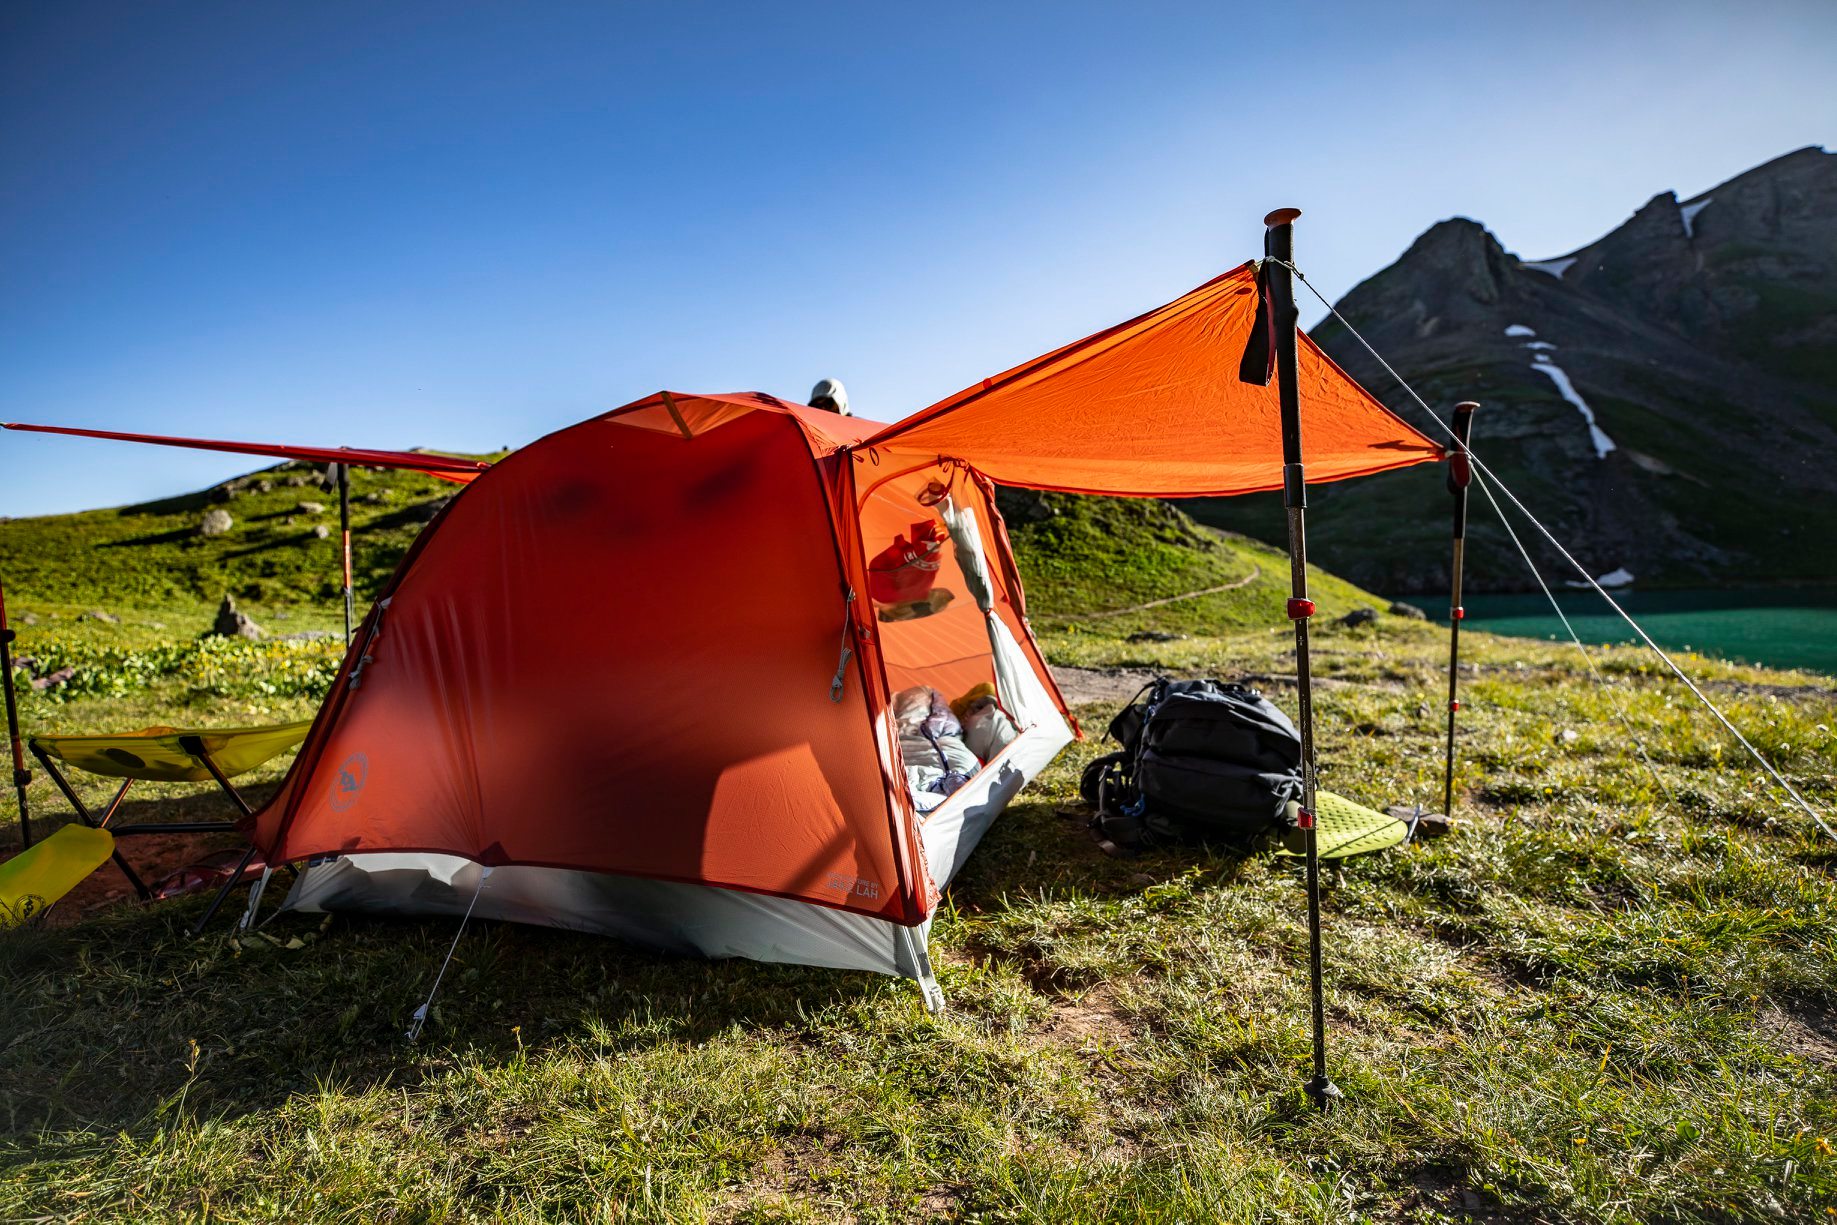 Big Agnes is one of the best tent brands